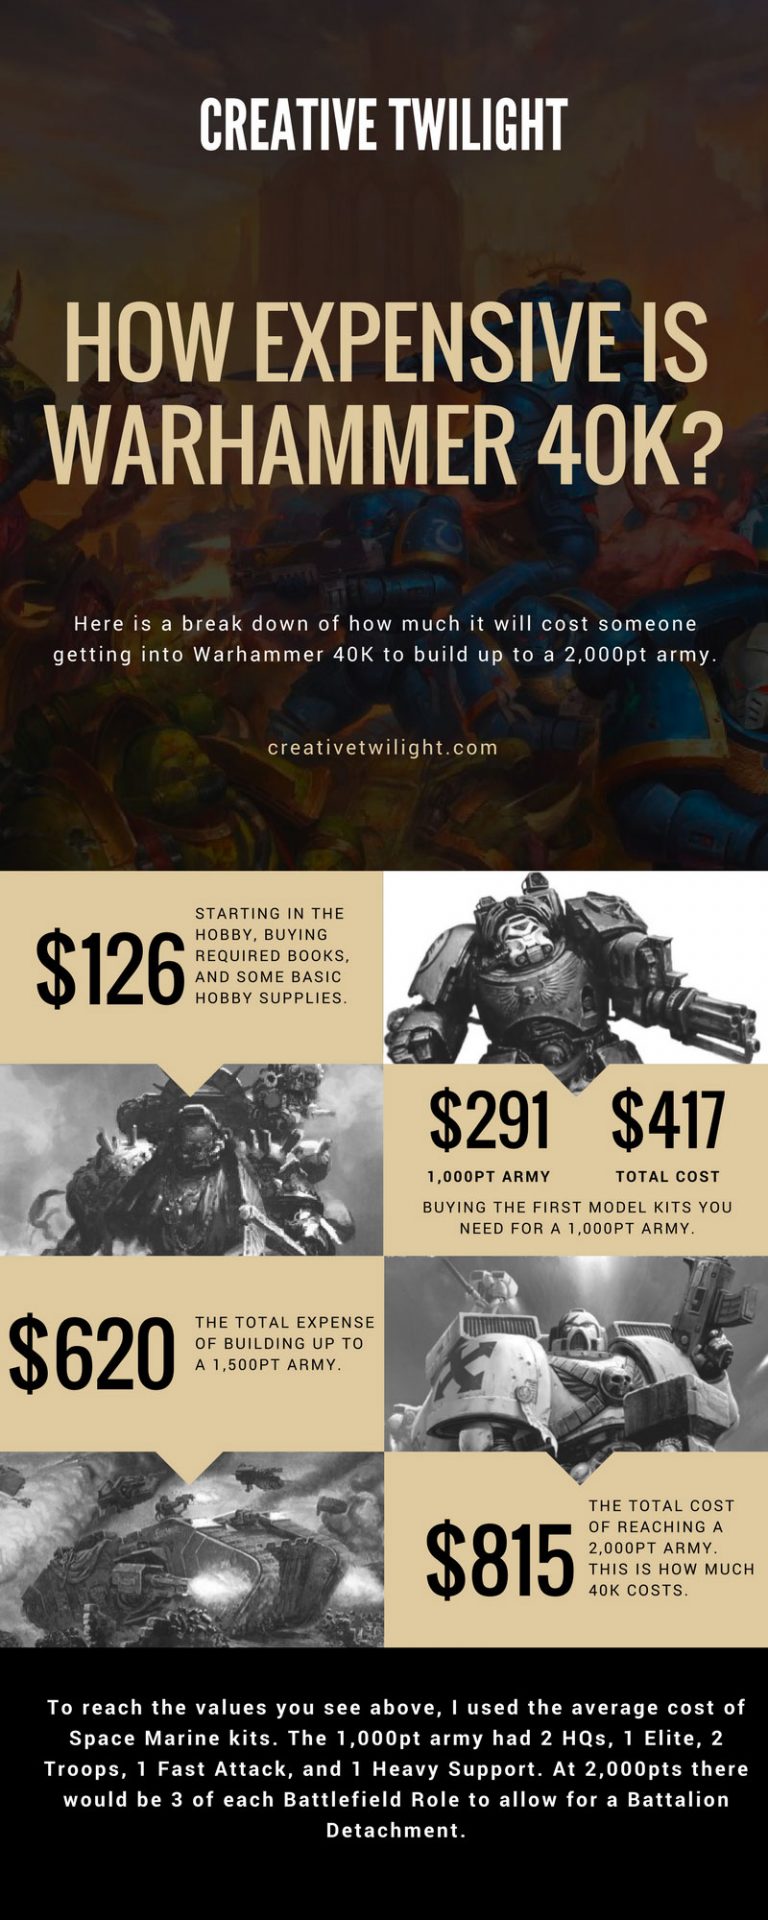 Is Warhammer 40k Expensive To Get Into?